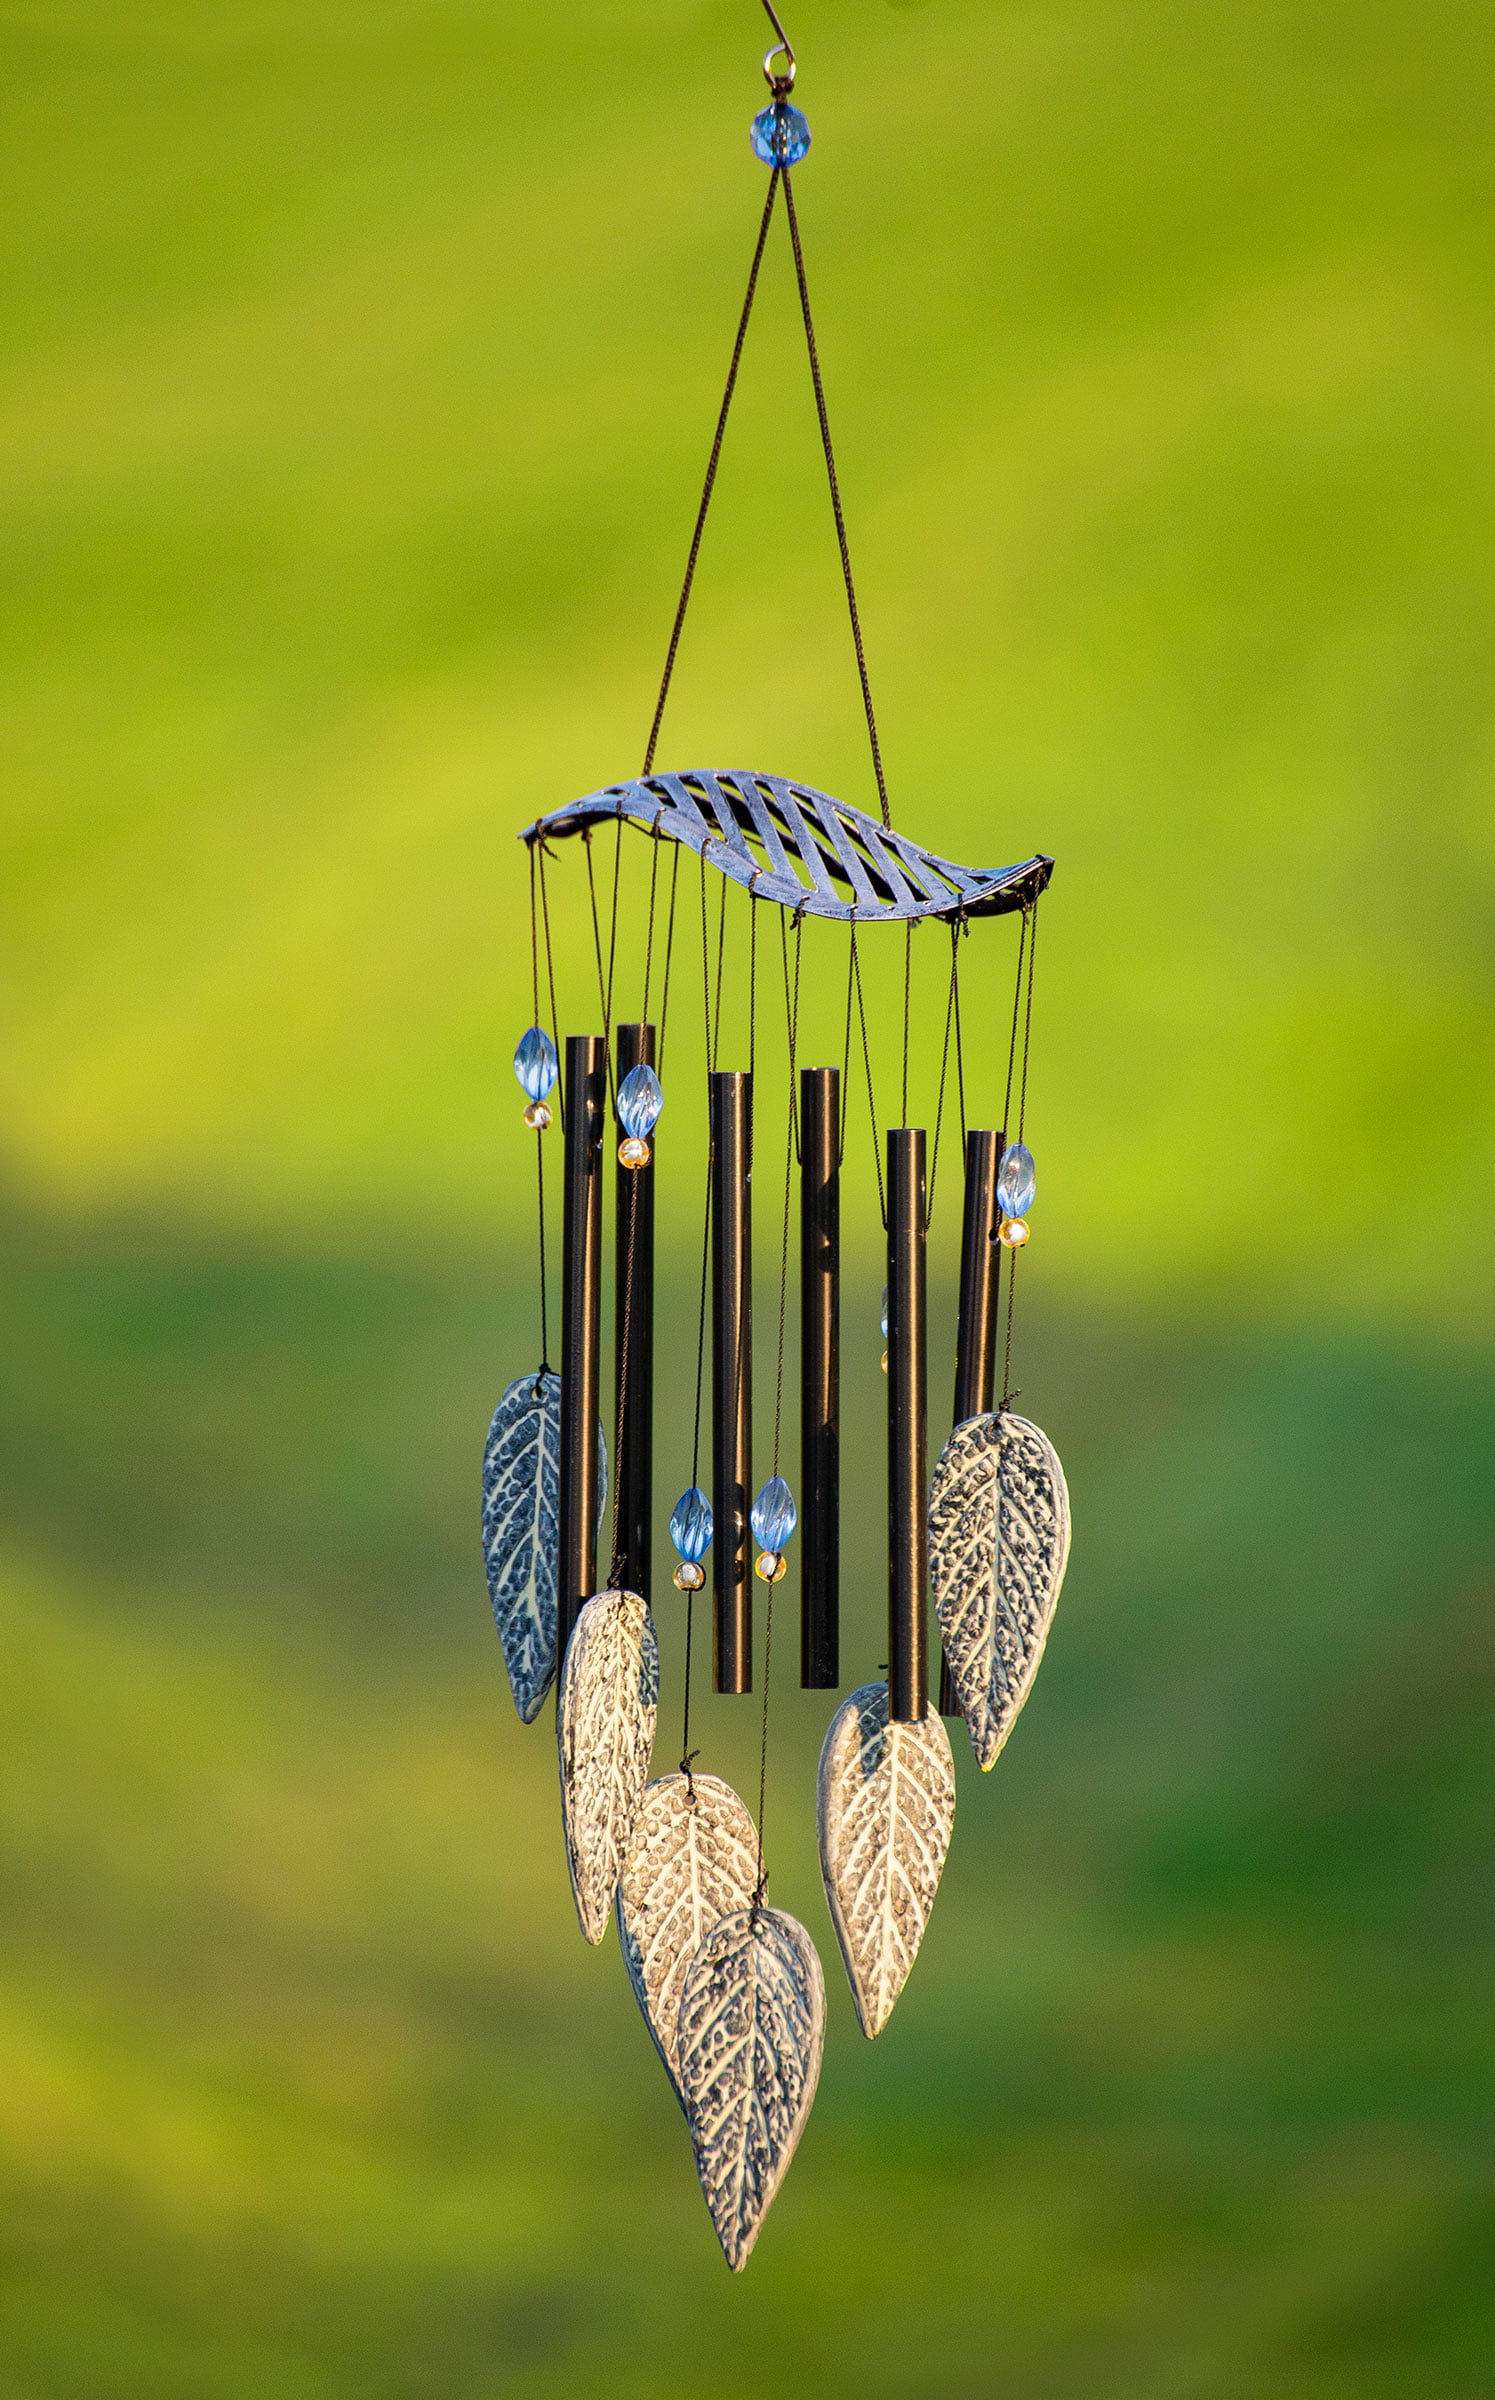 VP Home Rustic Copper Tribal Turtles Outdoor Garden Decor Wind Chime 